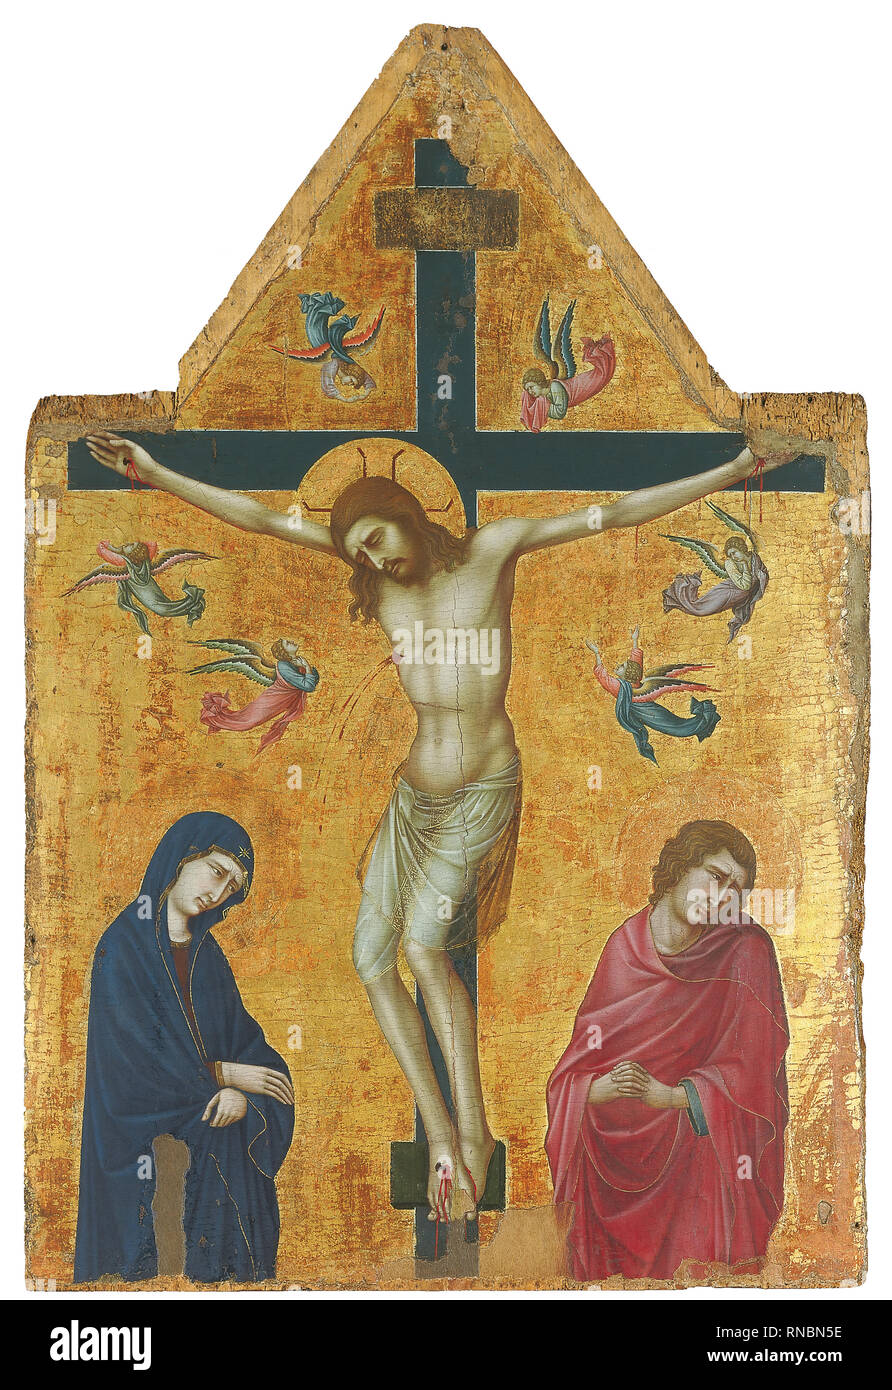 Ugolino di Nerio (Active in Siena, 1317-Siena (?), 1339 or 1349 (?)). The Crucifixion with the Virgin, Saint John and Angels (ca. 1330 - 1335). Tempera and gold on panel. 135 x 89 cm. Museum: Museo Nacional Thyssen-Bornemisza, Madrid. Stock Photo